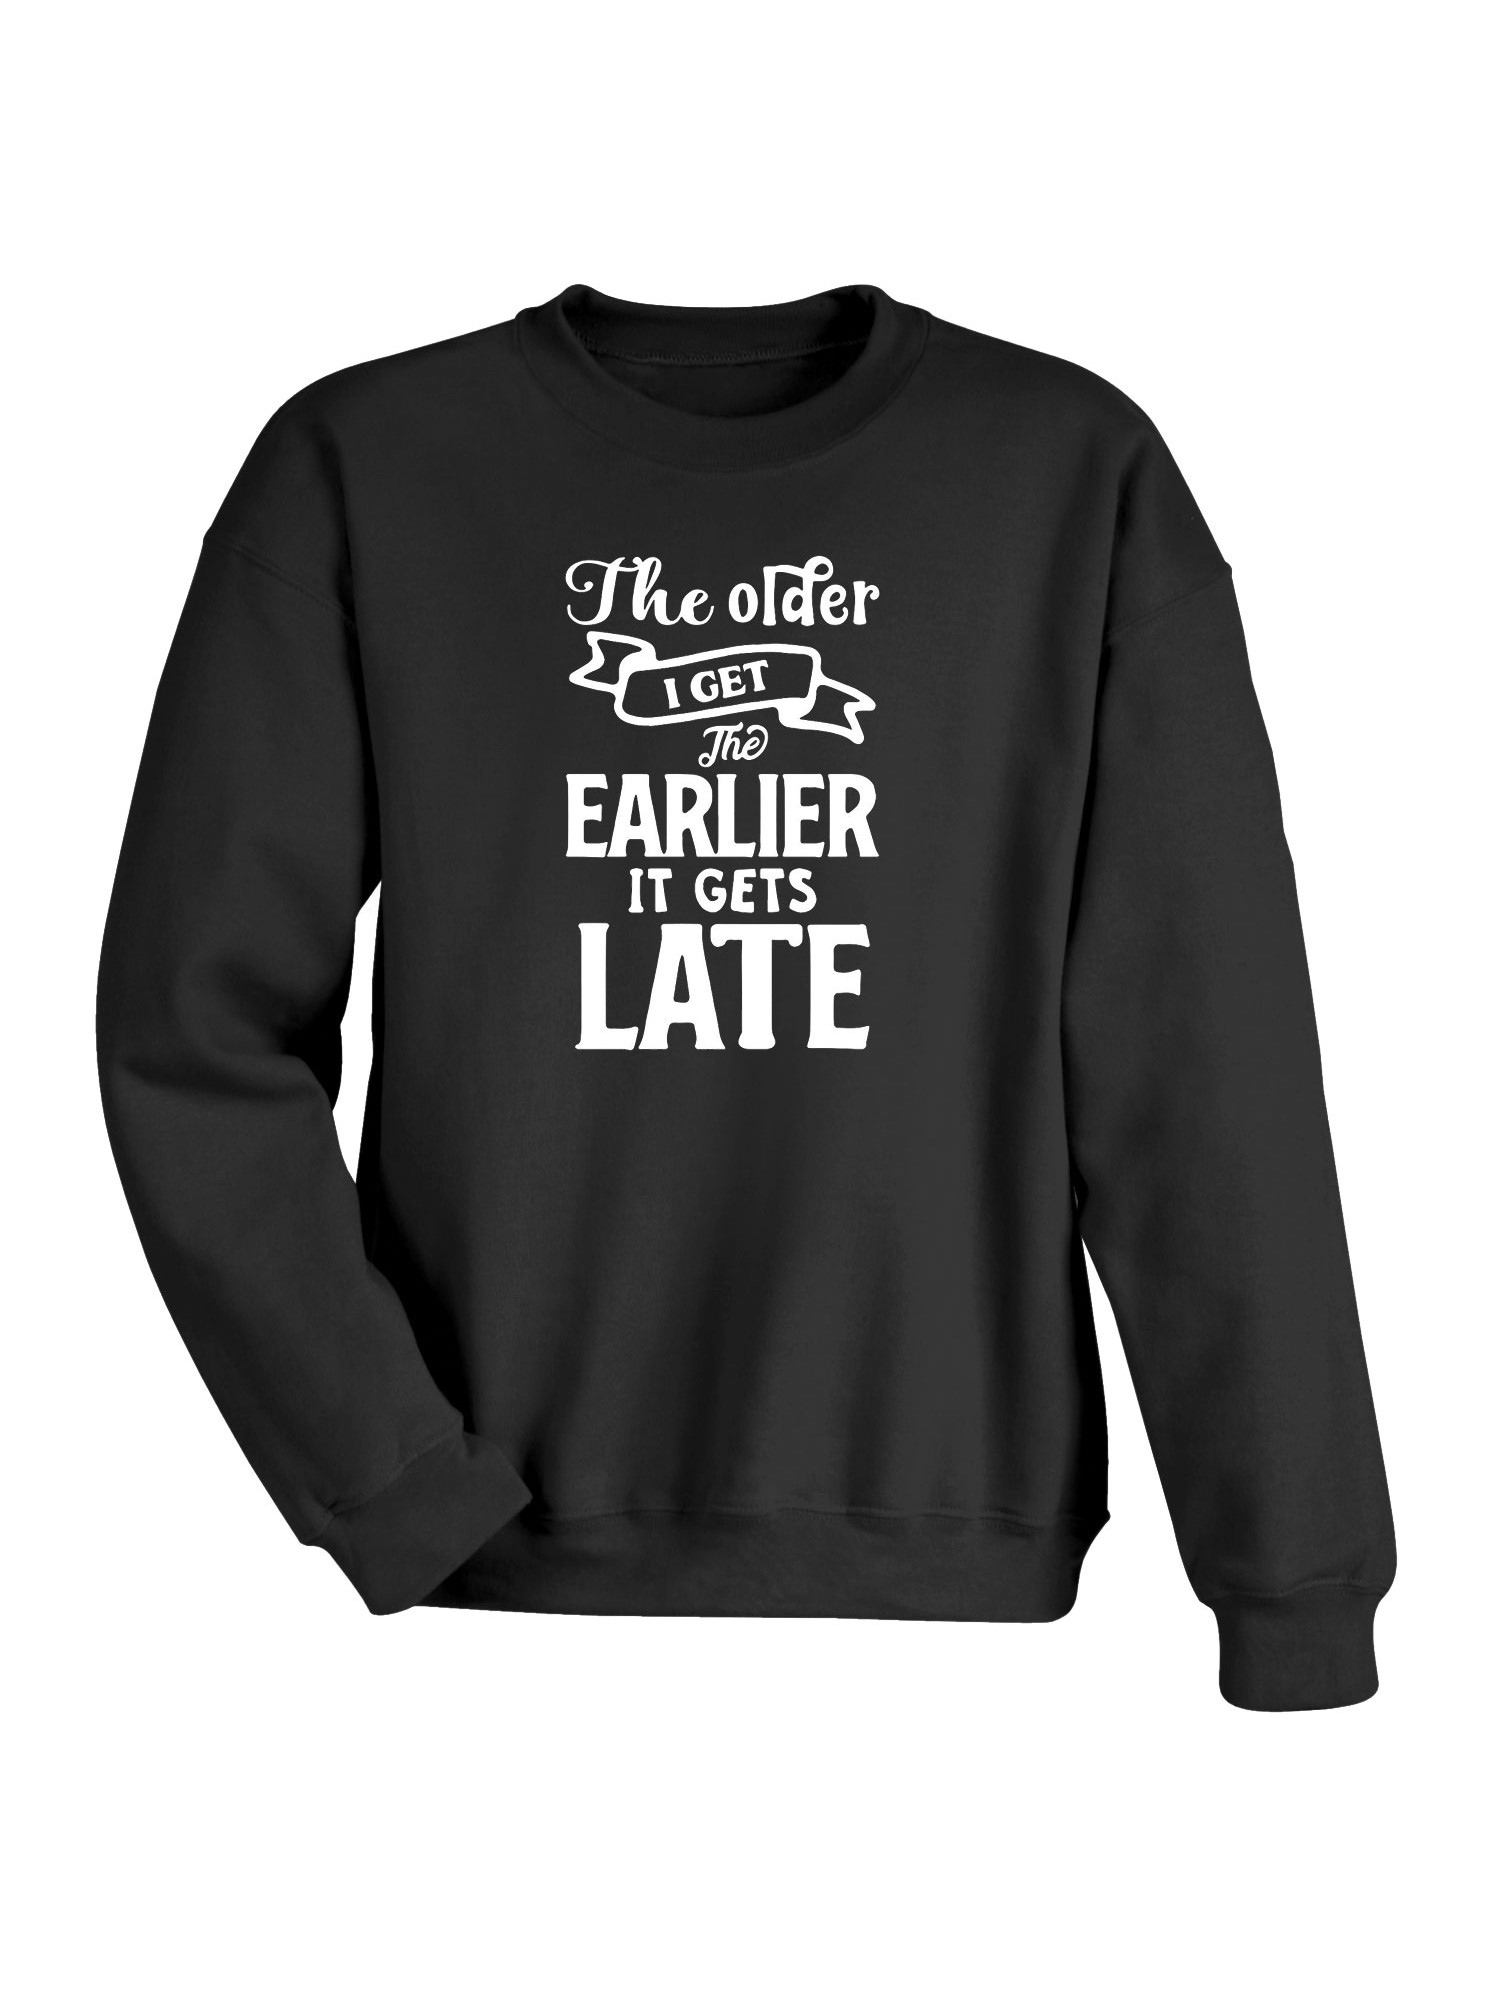 Product image for The Older I Get, The Earlier It Gets Late T-Shirt or Sweatshirt